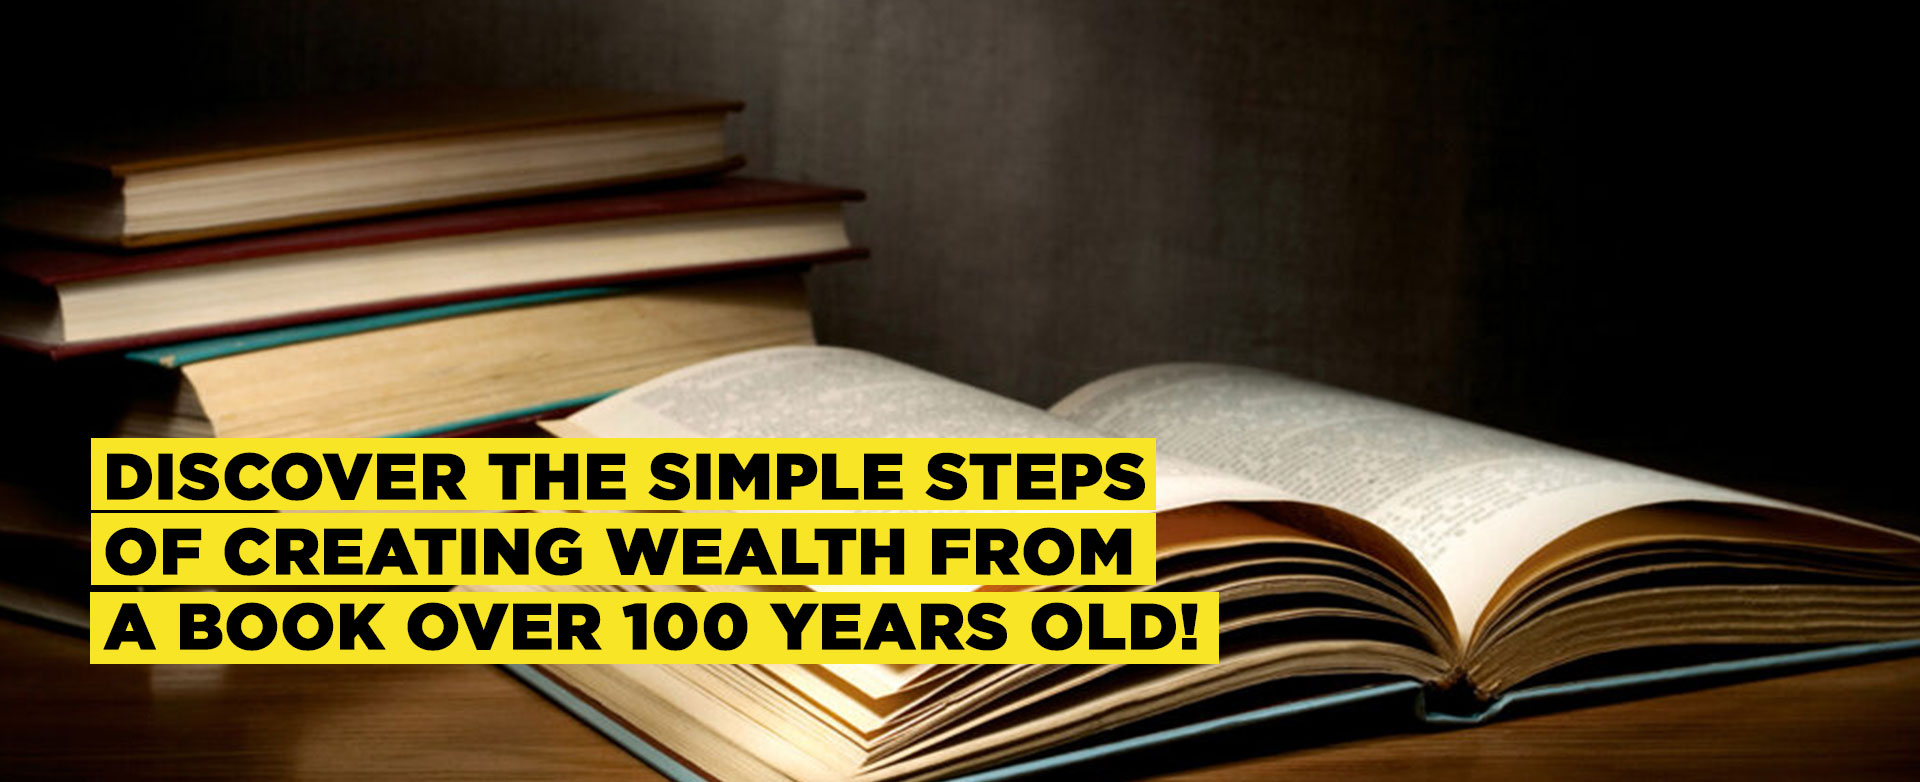 yPatriotsNetwork-Discover The Simple Steps Of Creating Wealth From A Book Over 100 Years Old!